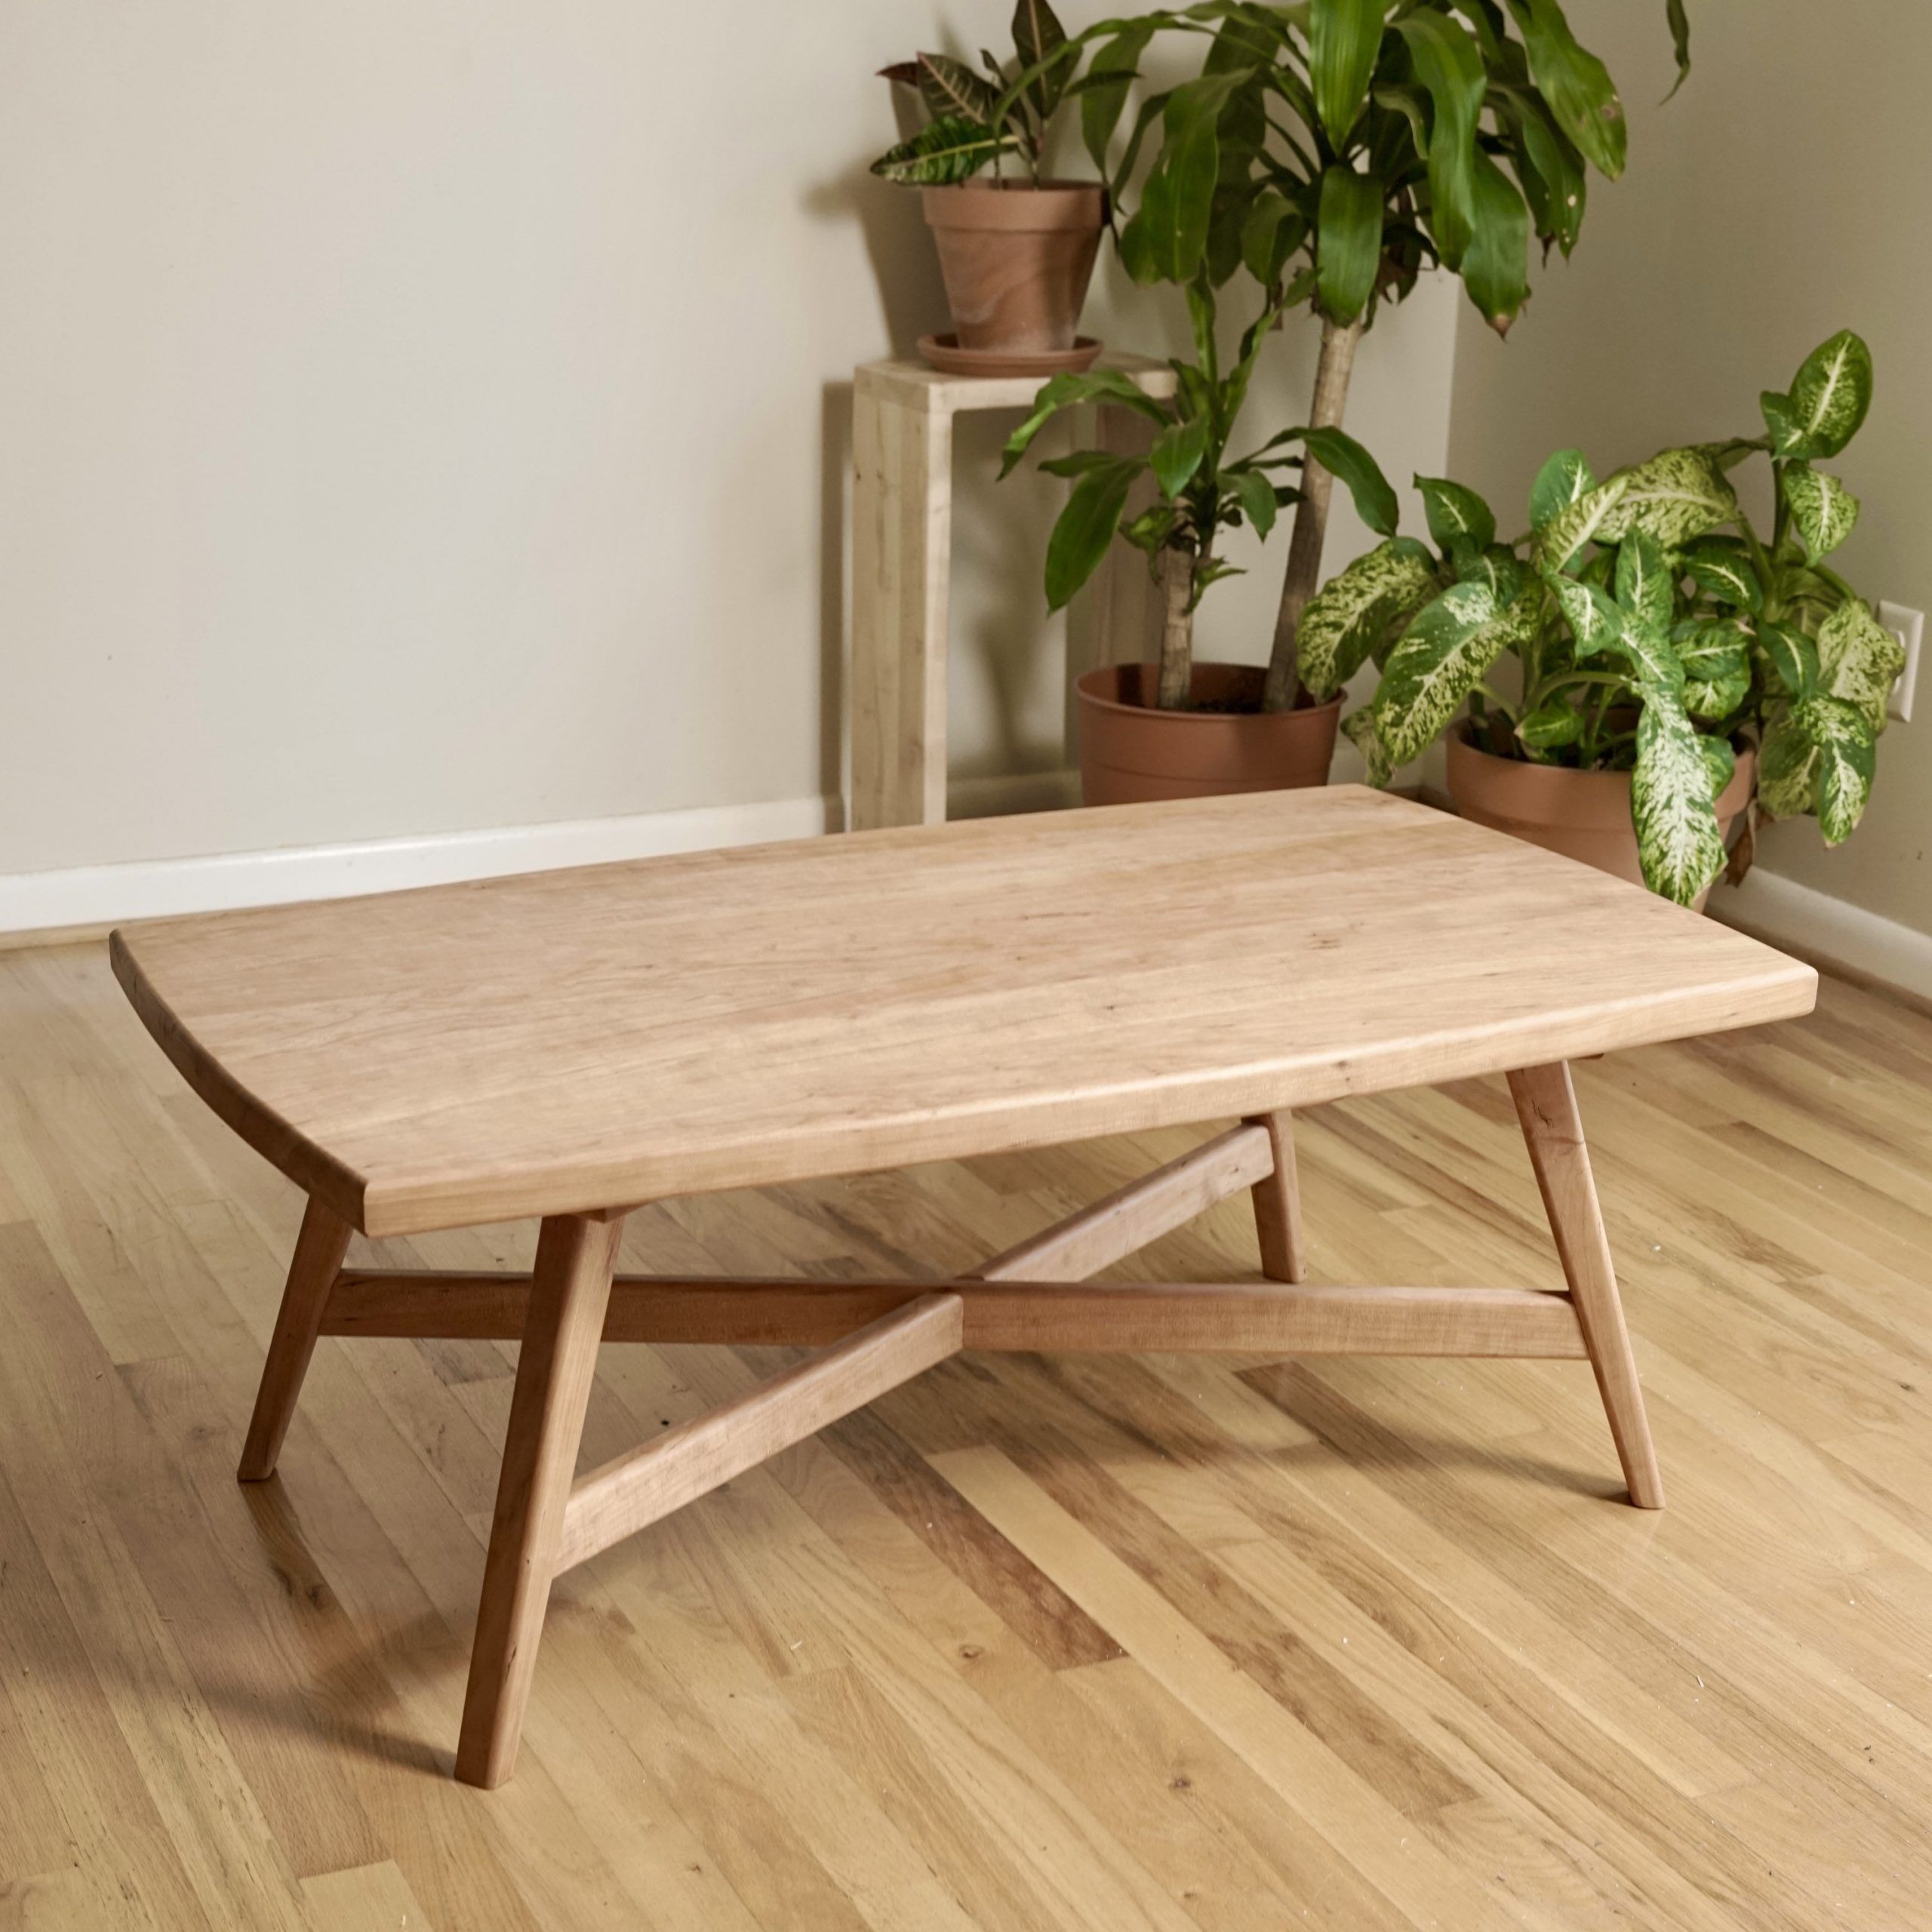 Widely Used Scandinavian Coffee Tables With Buy Scandinavian Coffee Table Cherry Coffee Table Maple Coffee Online In  India – Etsy (View 1 of 20)